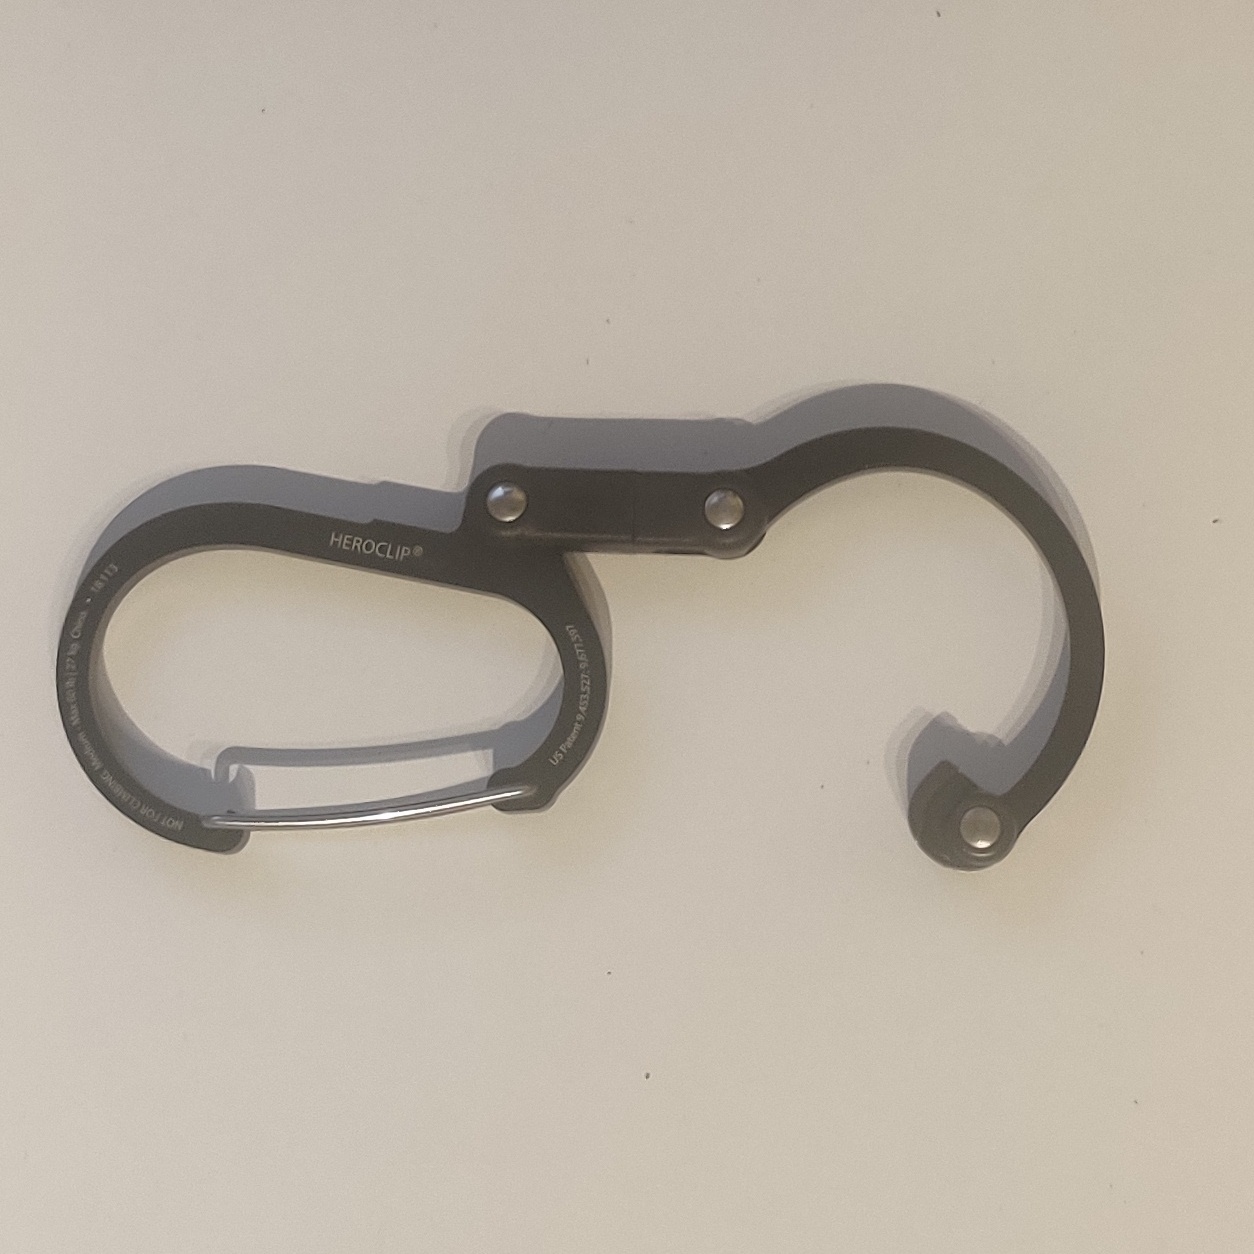 A Heroclip carabiner with an extra hook extended 